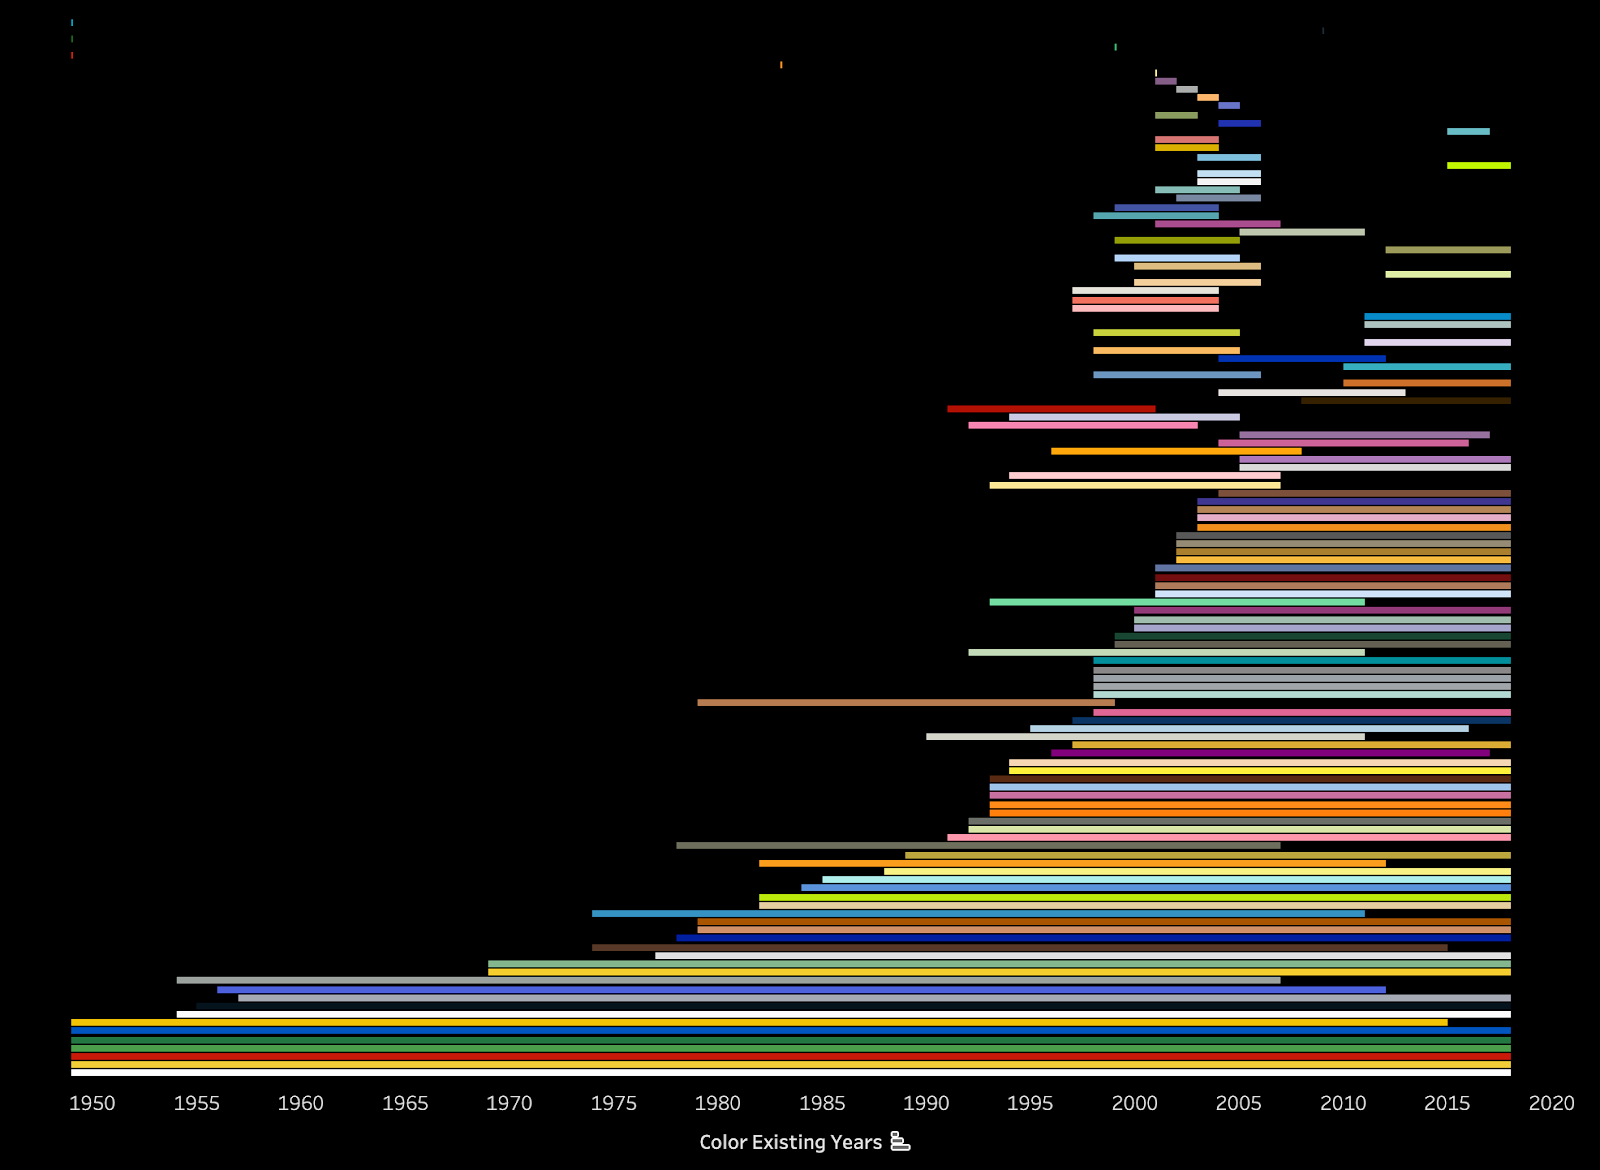 Visualisation of colours in use in LEGO sets over time